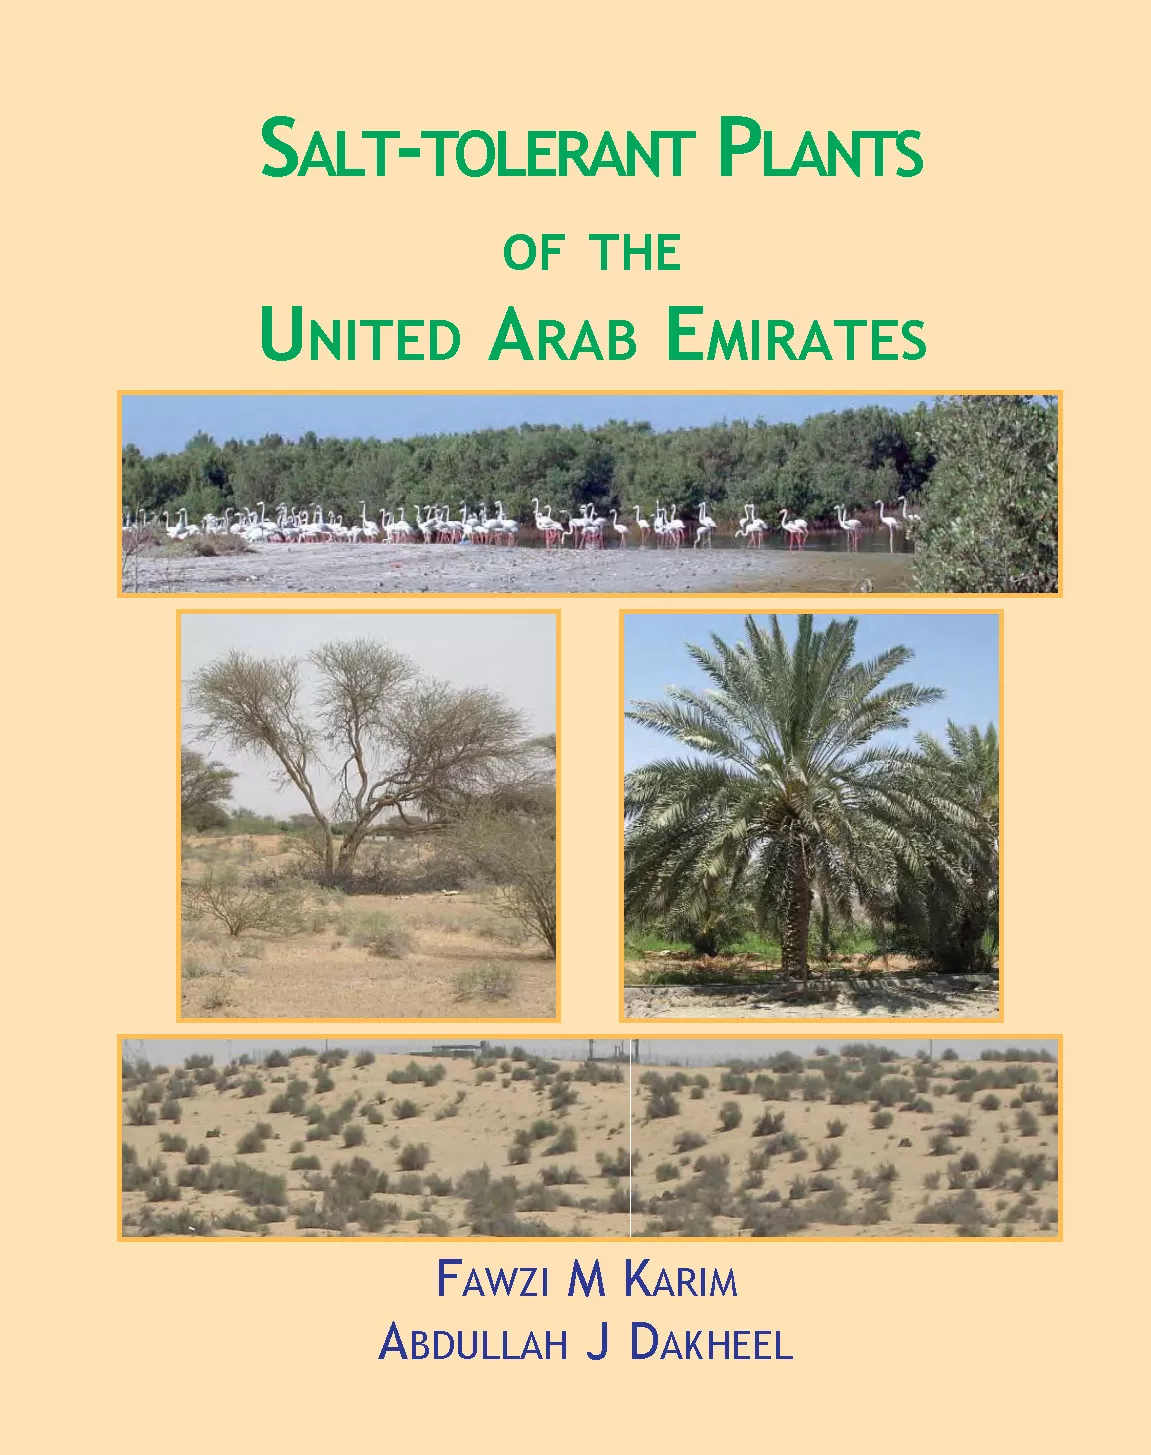 Salt-tolerant Plants of the United Arab Emirates International Center for Biosaline Agriculture and Abu Dhabi Food Control Authority